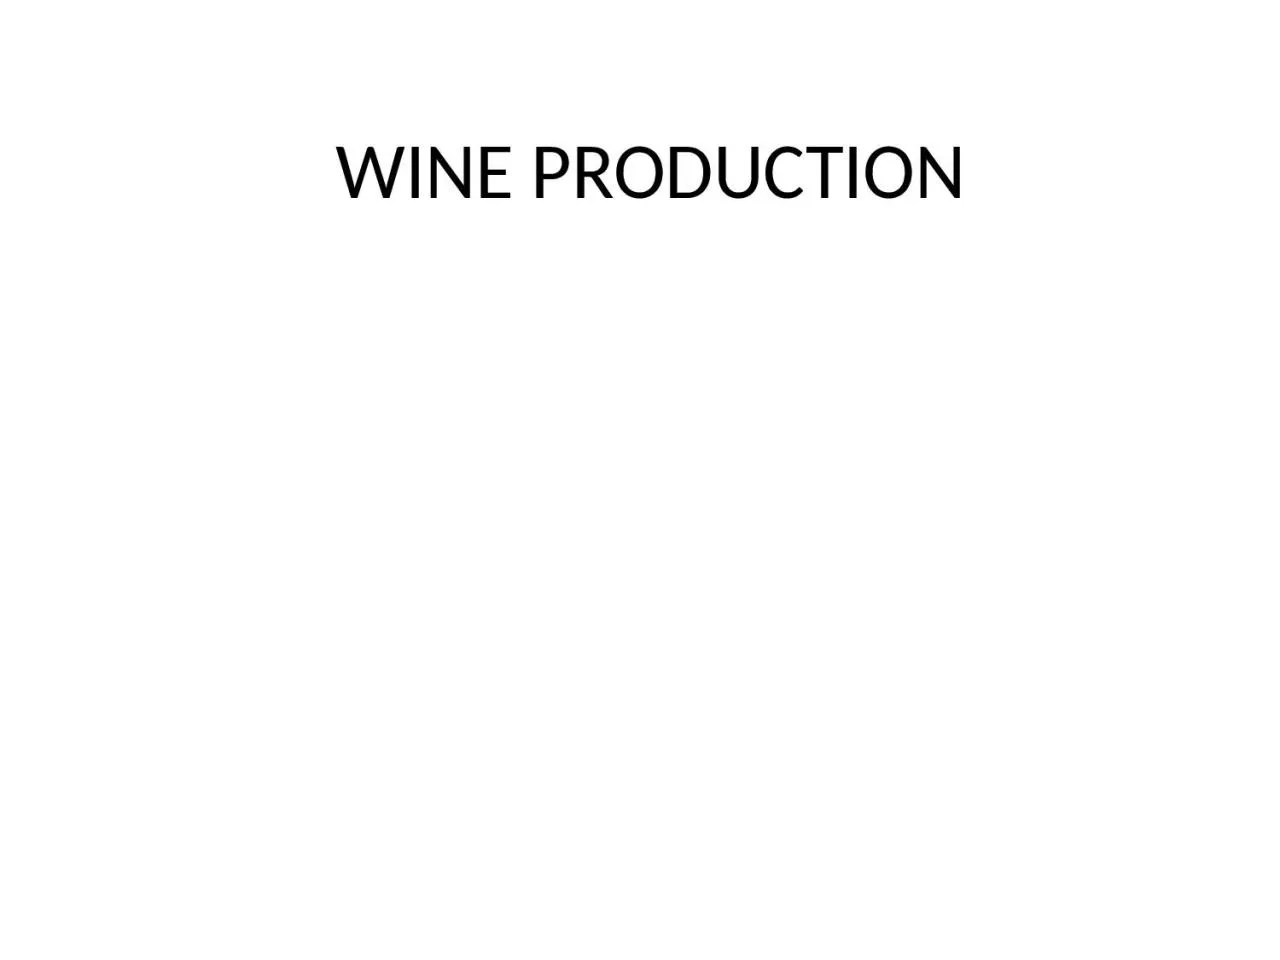 WINE PRODUCTION   		 INTRODUCTION